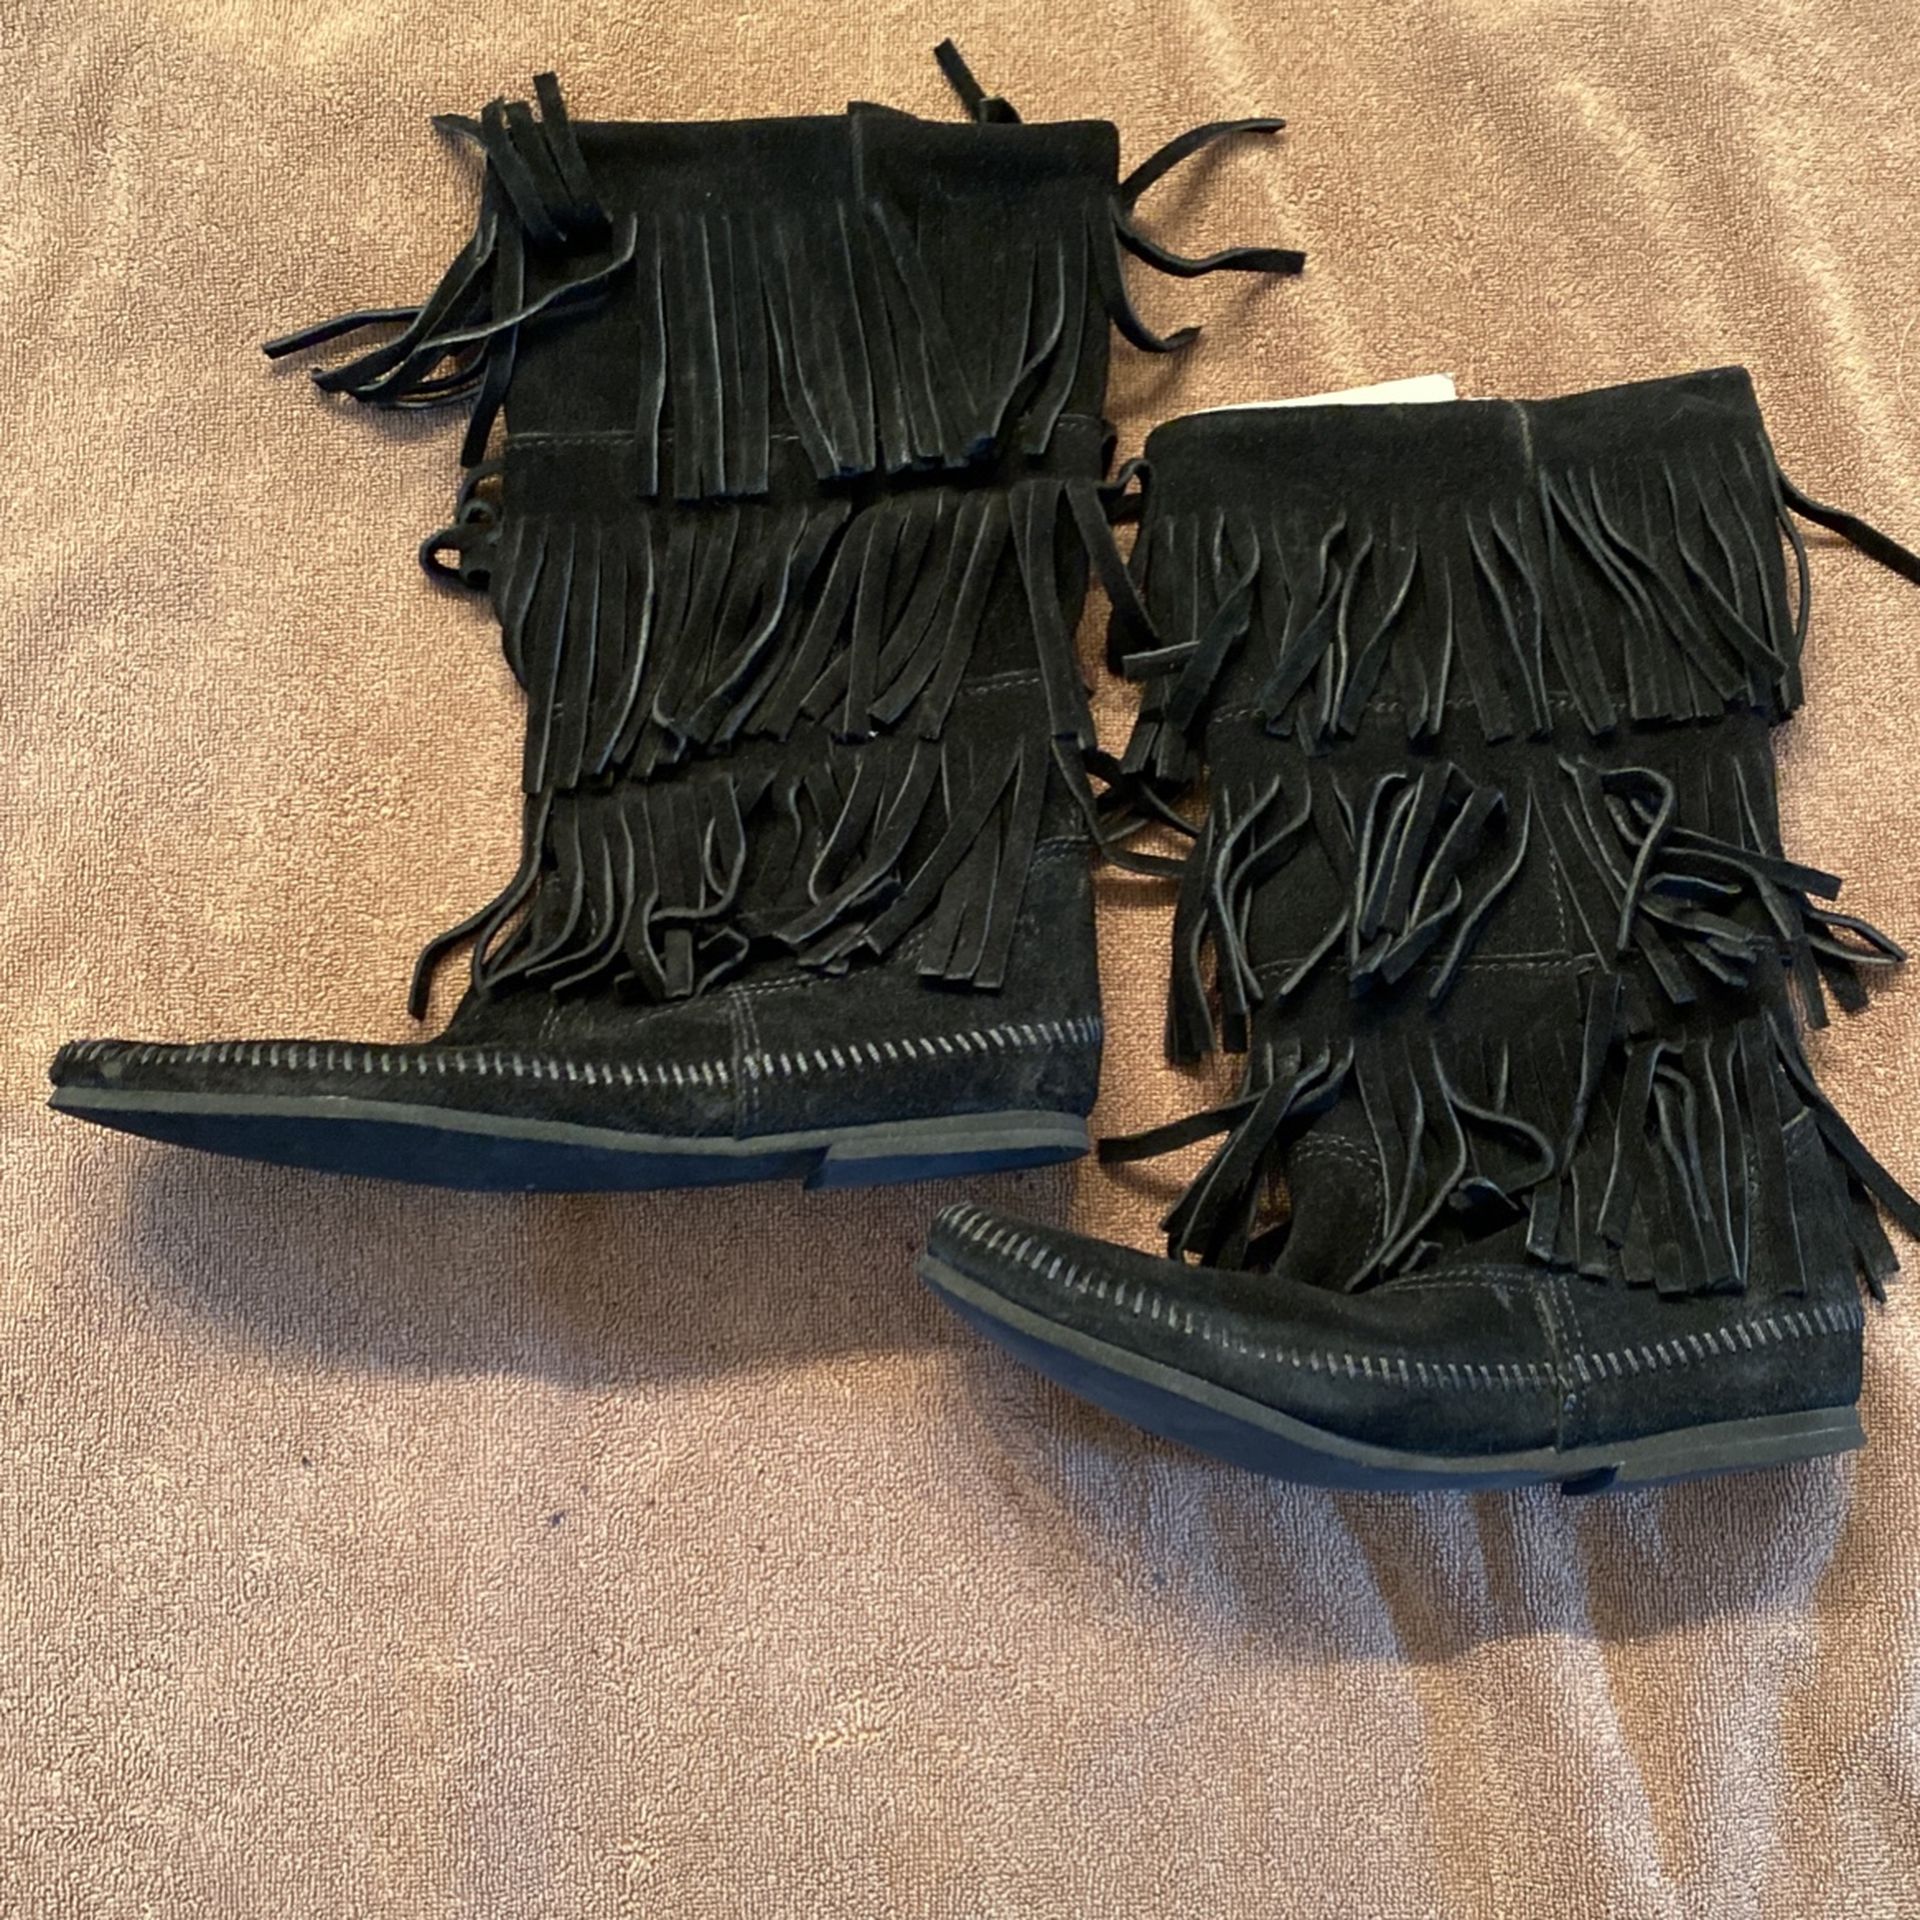 Ladies Black Suede Fringed Flat Boots